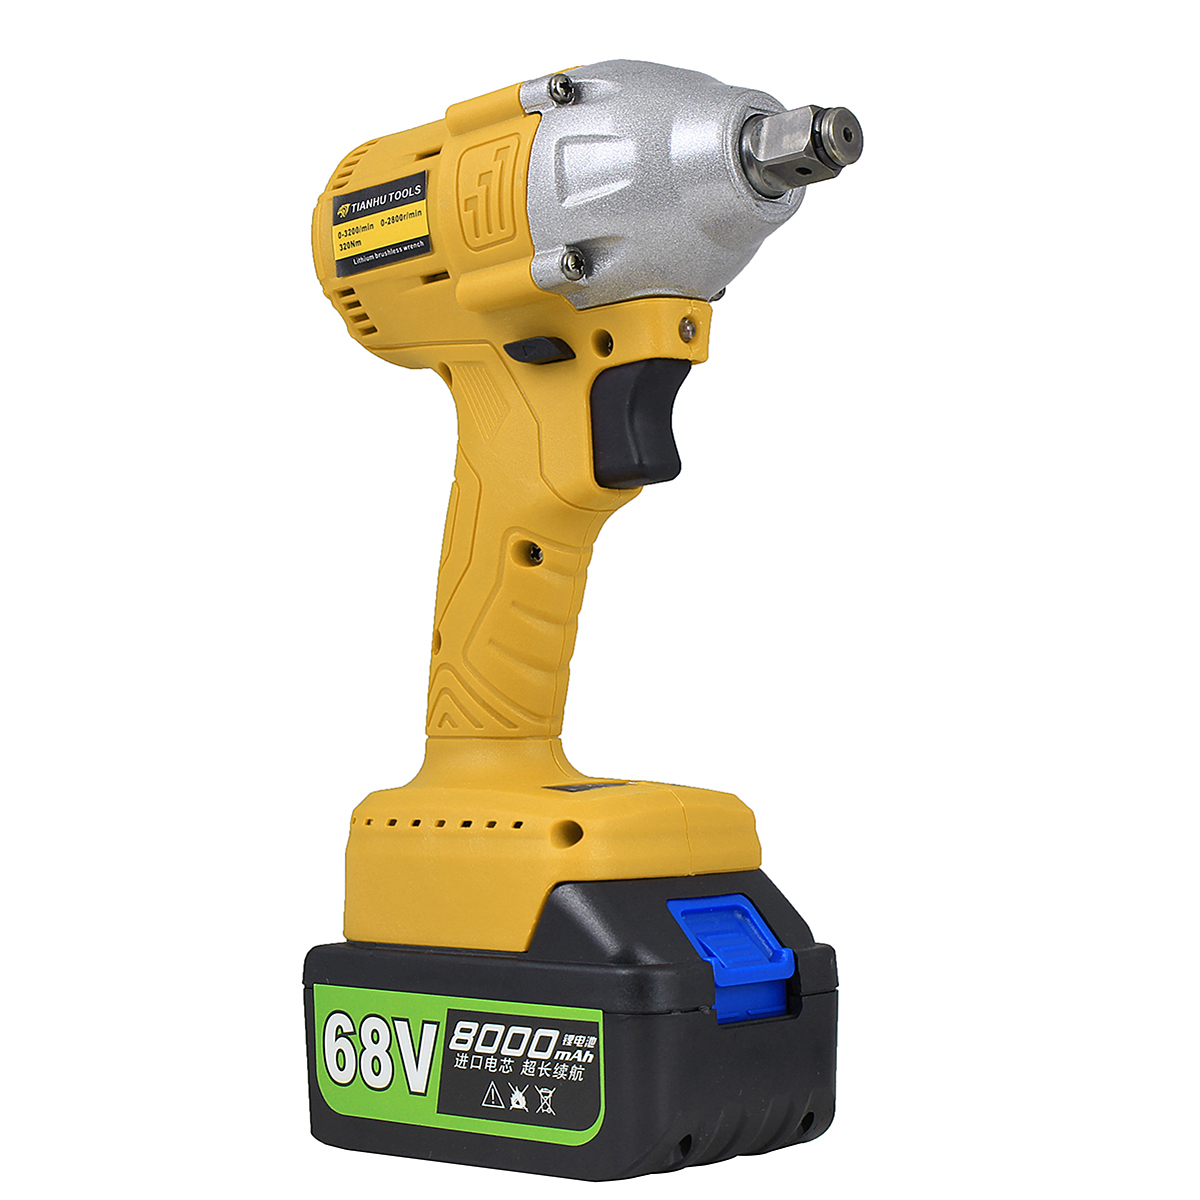 8000mAh-68V-Lithium-Ion-Brushless-Cordless-High-Torque-Square-Drive-Impact-Wrench-1262426-5